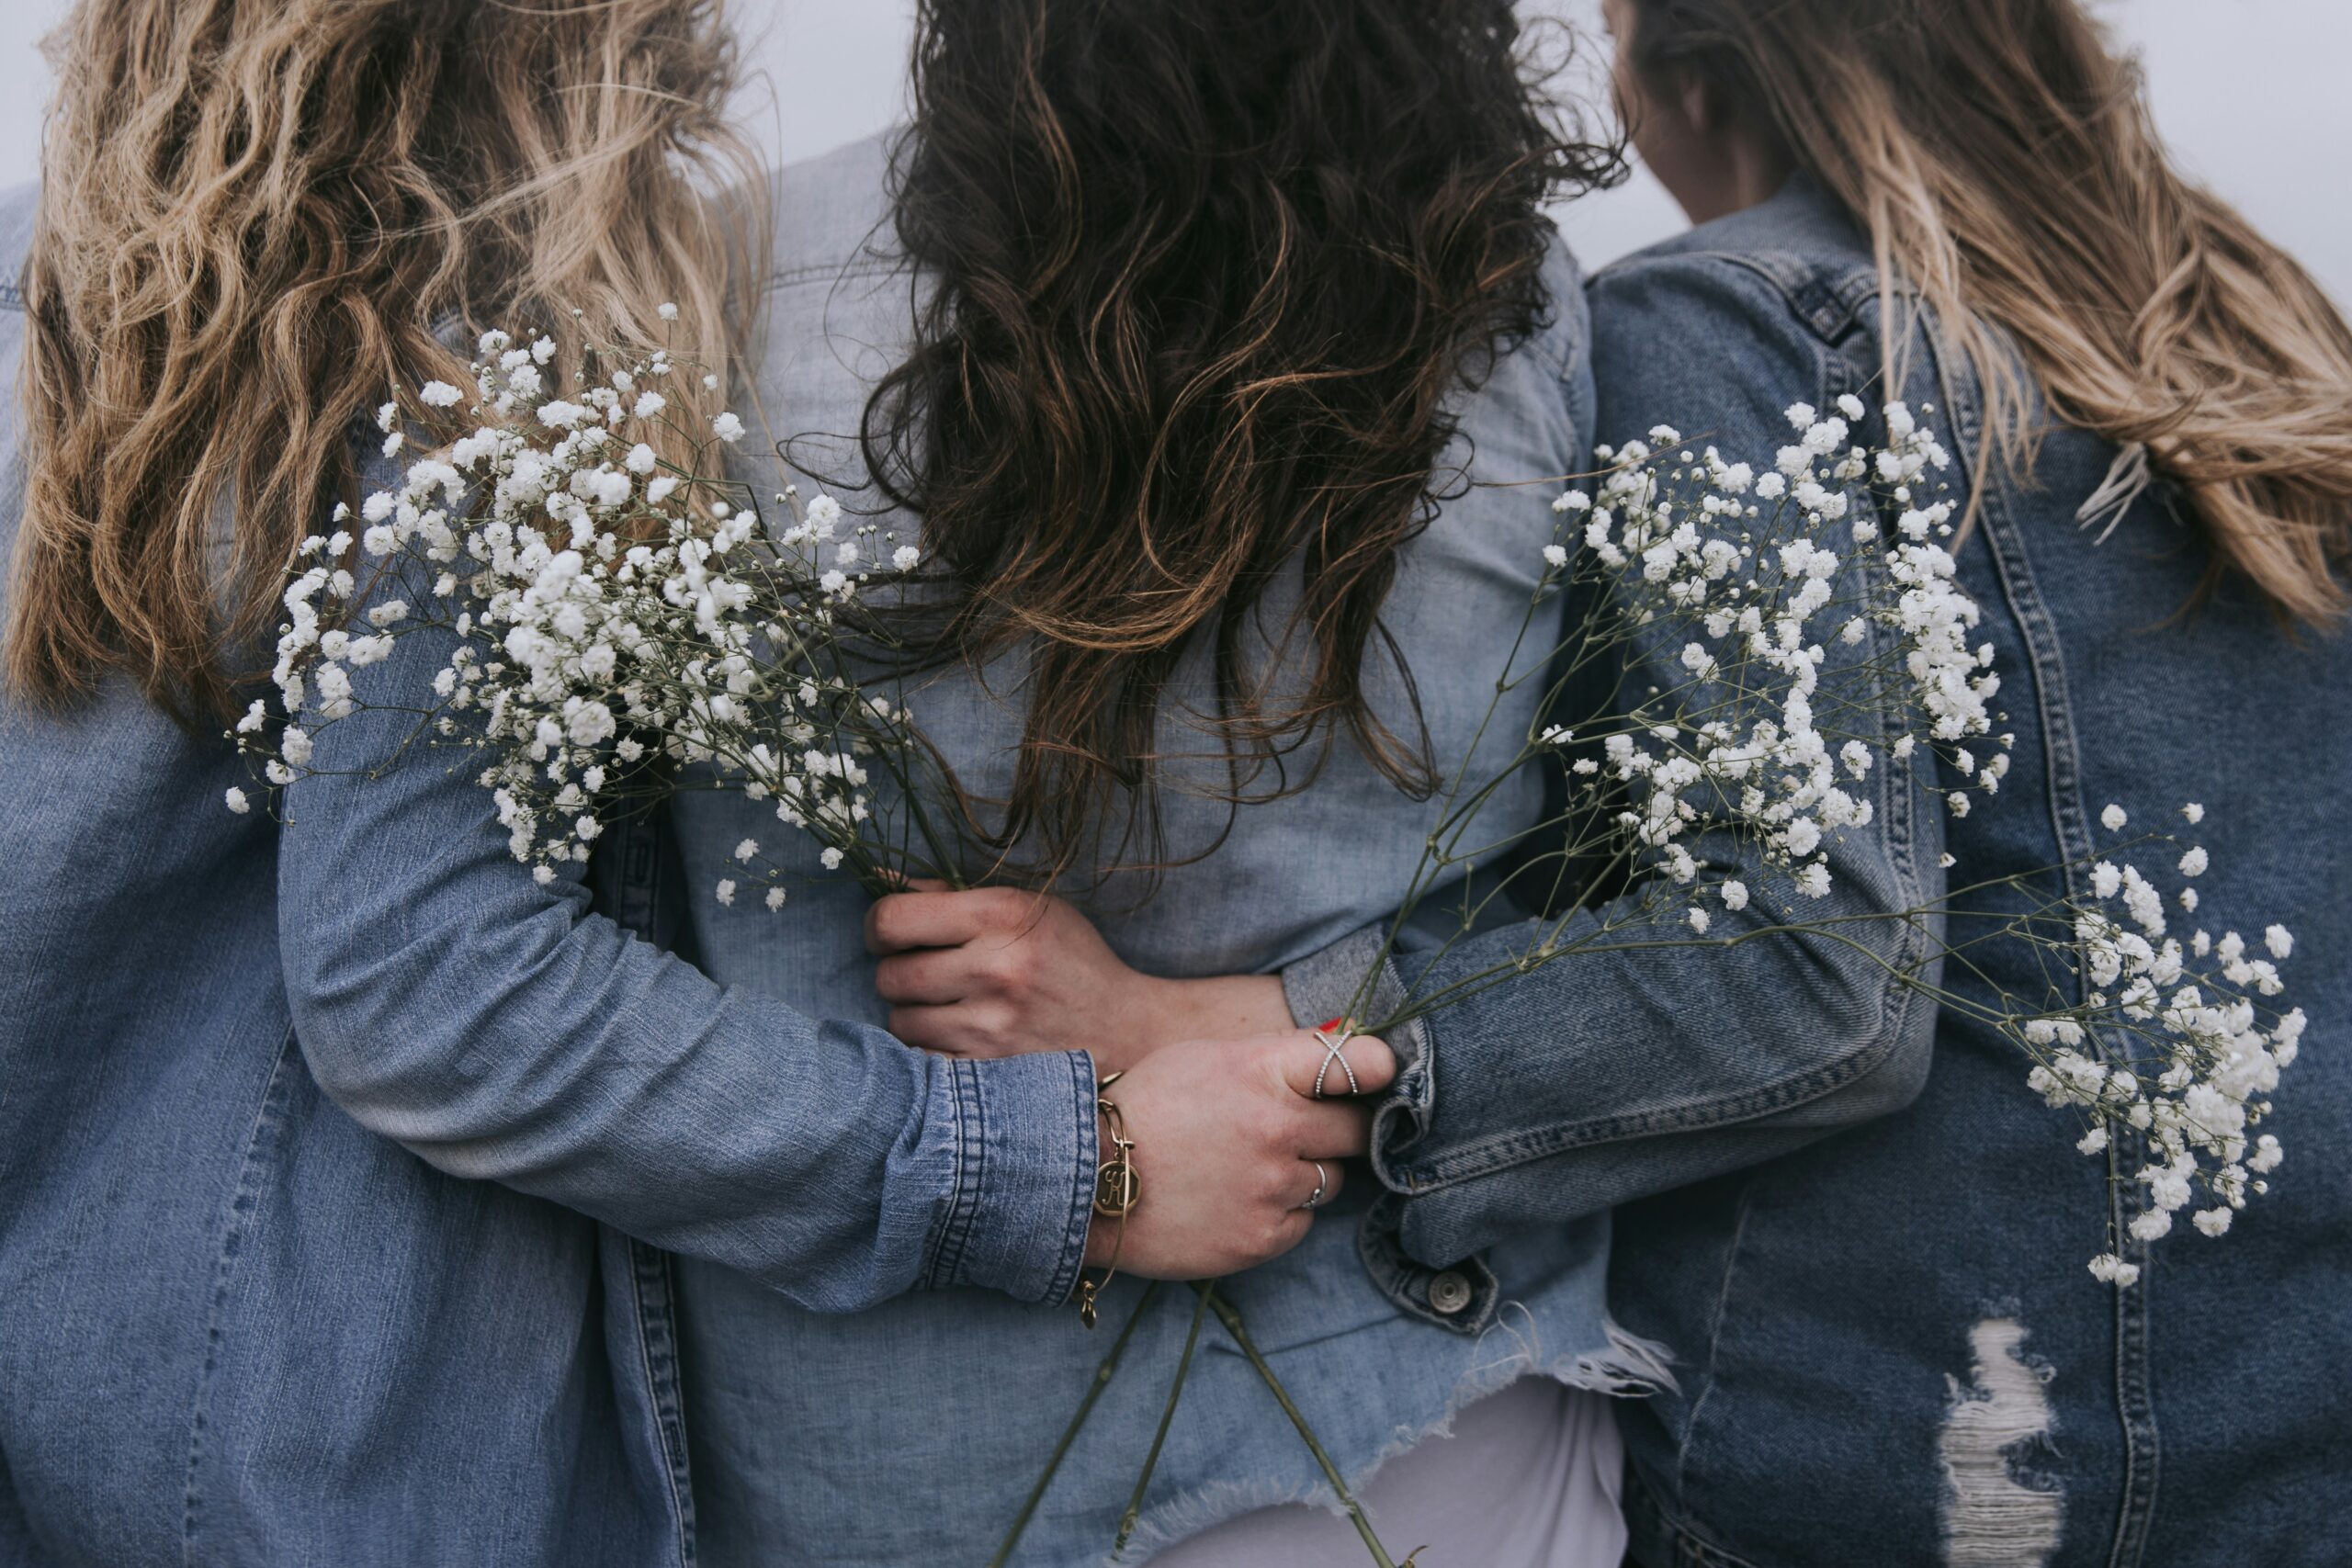 group of women with their backs toward us, holding flowers and with arms around each other 